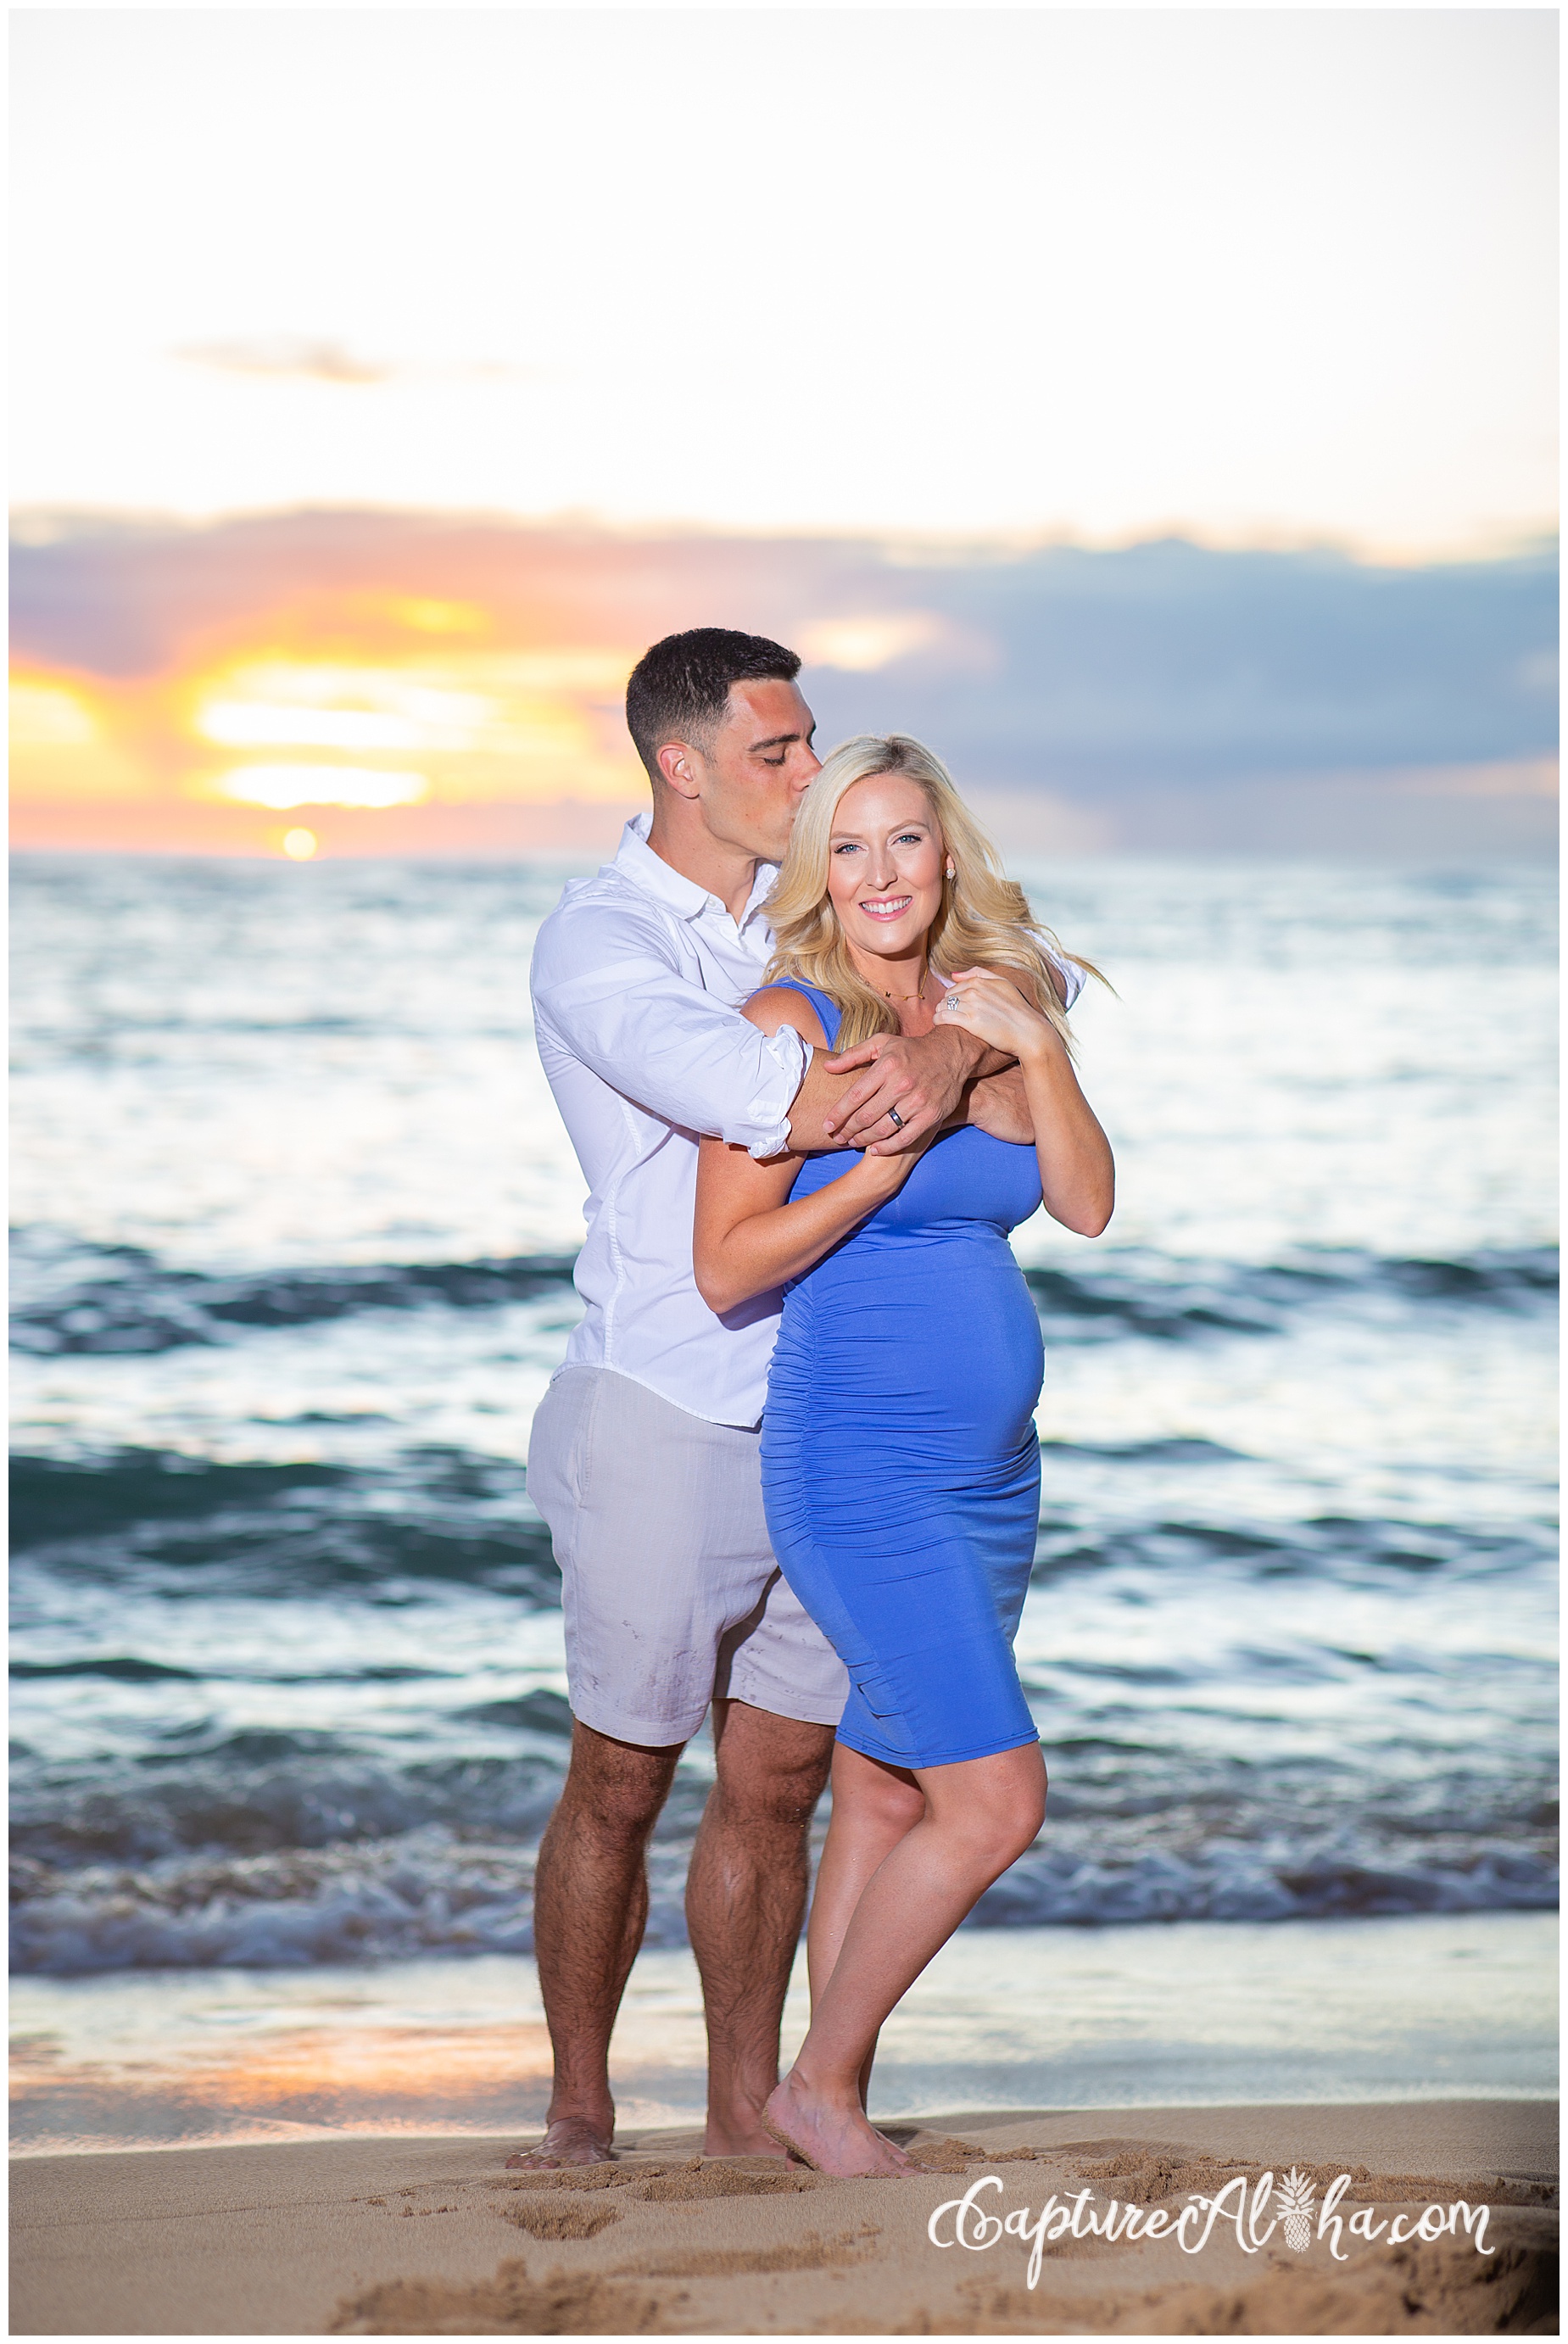 Wife and husband on a maternity photoshoot in Maui on the beach with the sunset